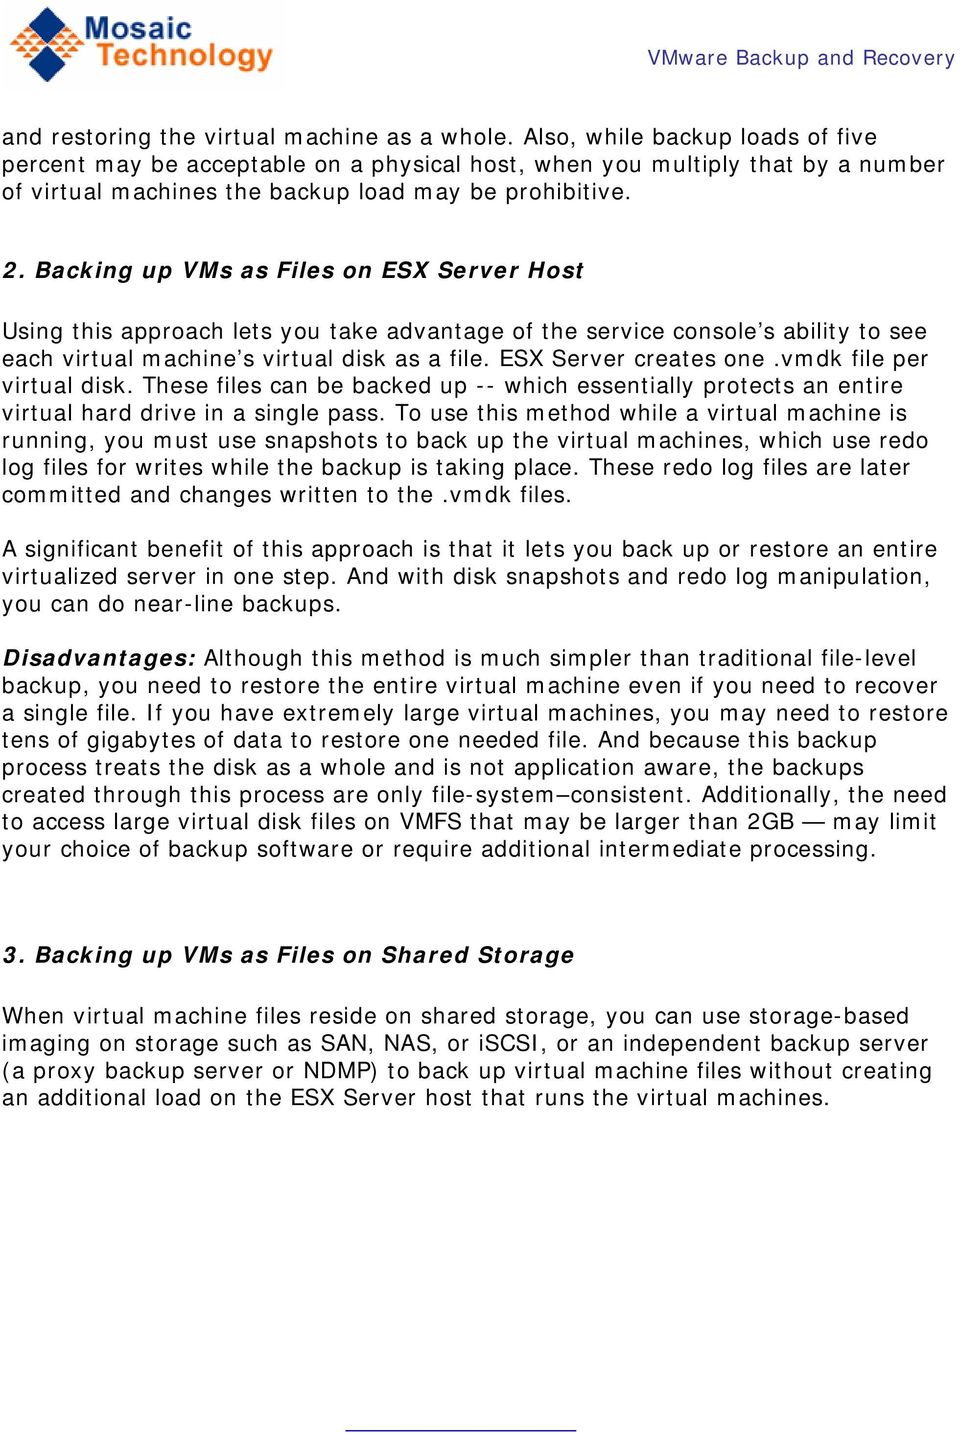 Backing up VMs as Files on ESX Server Host Using this approach lets you take advantage of the service console s ability to see each virtual machine s virtual disk as a file. ESX Server creates one.